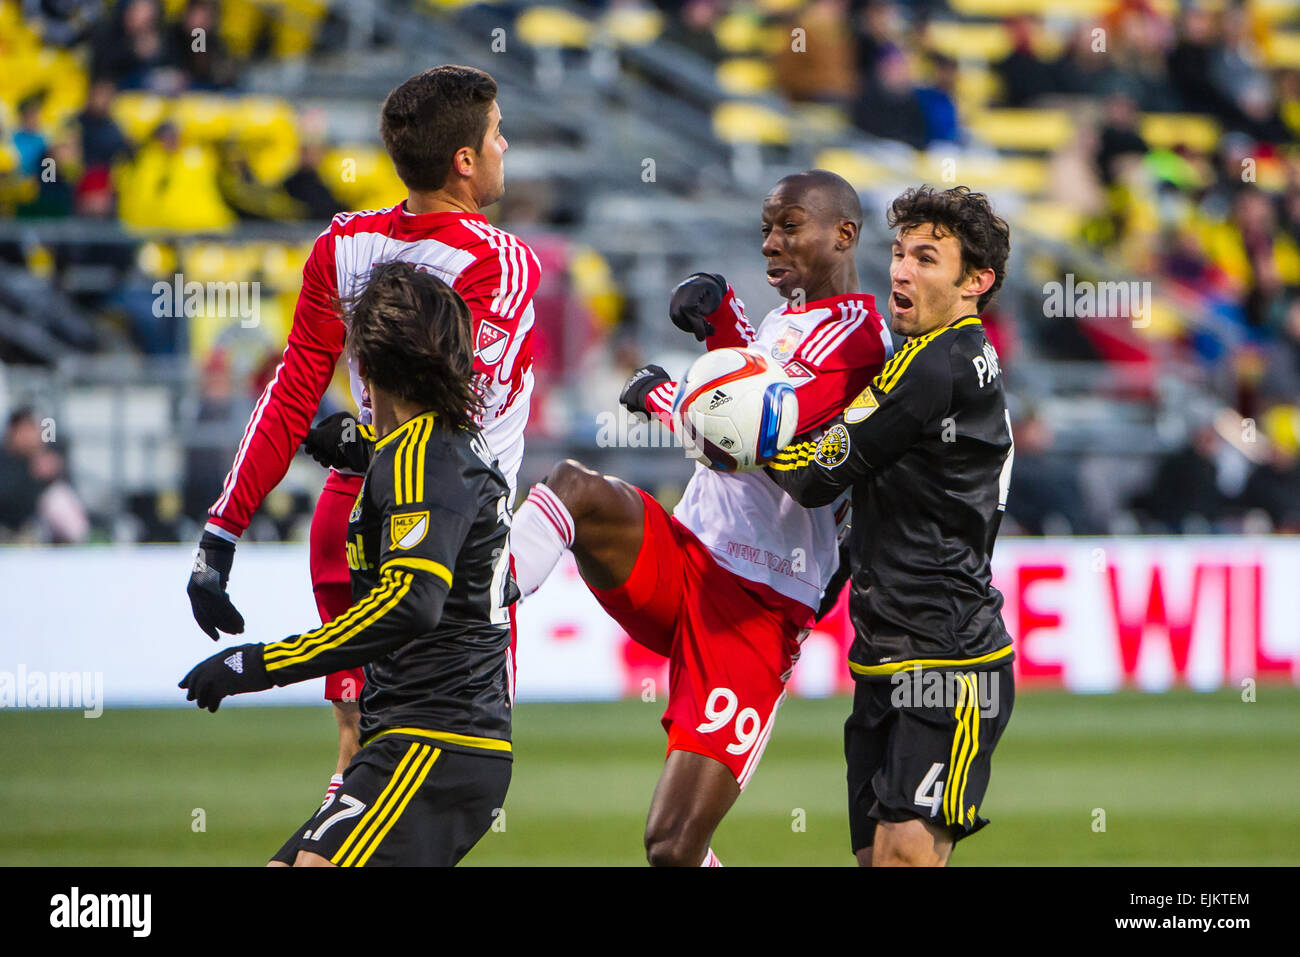 In the first half, Columbus Crew SC defender Michael Parkhurst (4) and New York Red Bulls forward Bradley Wright-Phillips (99) battle for the ball during the match between New York Red Bulls (1-0-1, 4 points) and Columbus Crew SC (1-1-0, 3 points) at MAPFRE Stadium, in Columbus OH. on March 28, 2015. Stock Photo